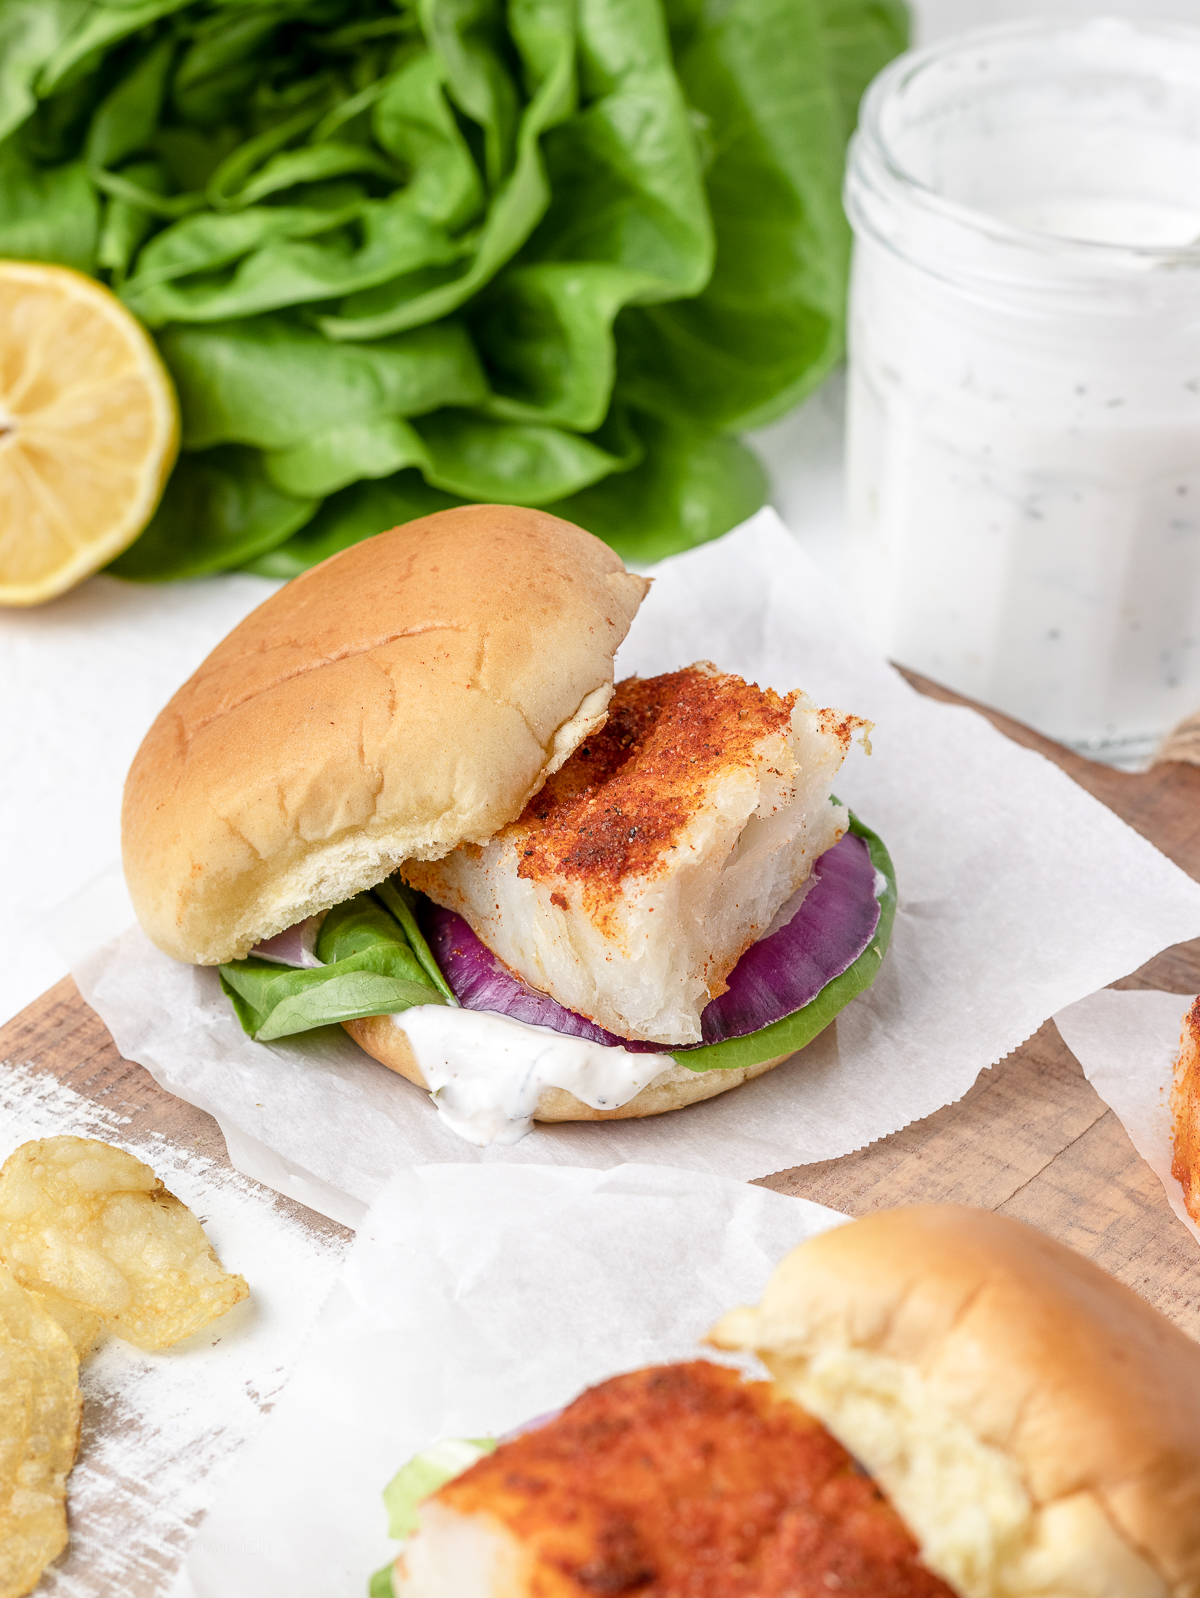 A baked cod fish sliders with top buns on the side and flaky, paprika seasoned cod fish exposed.